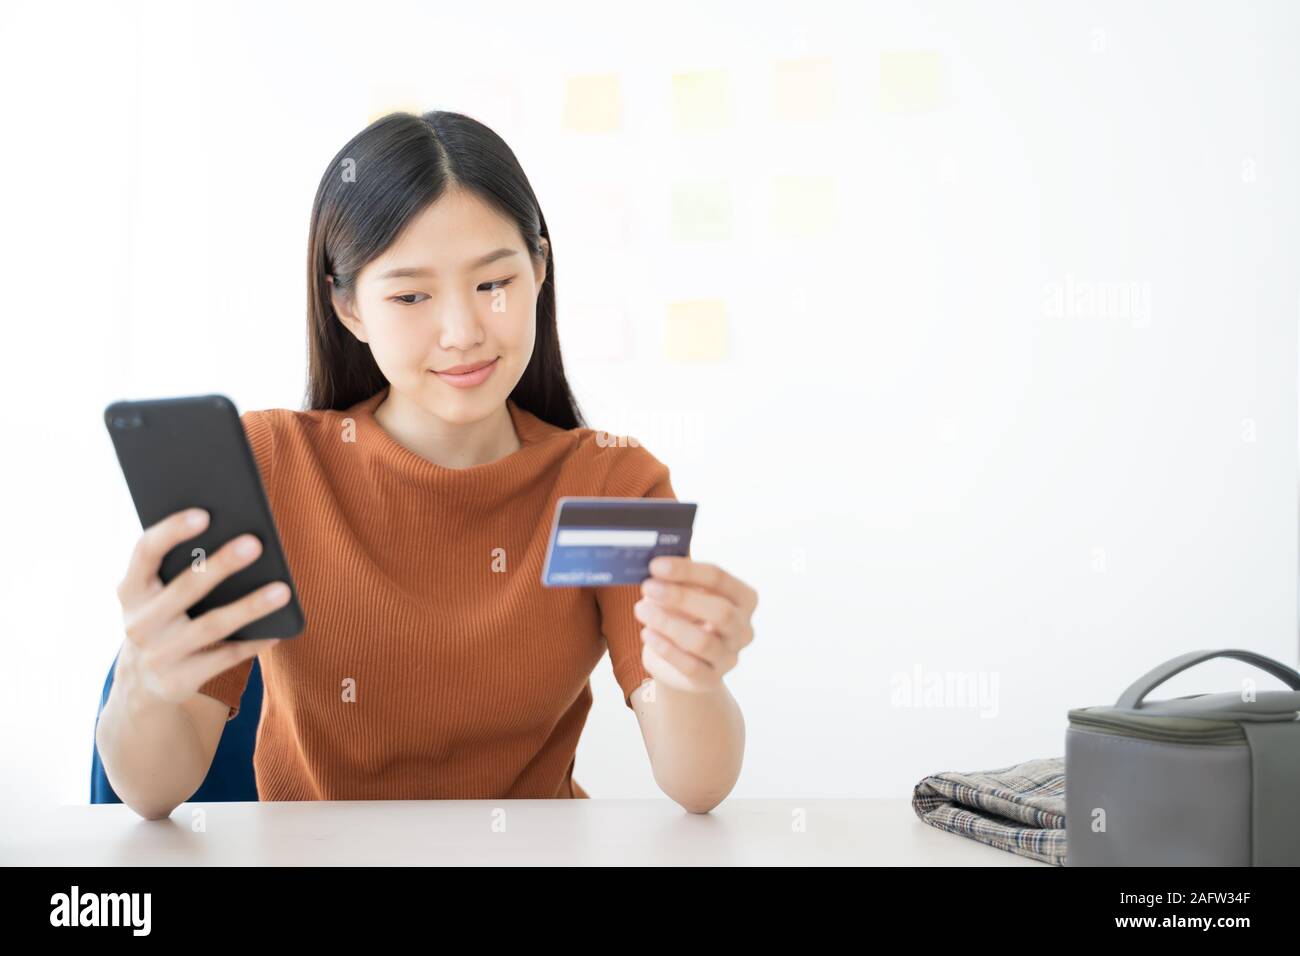 Young Asian woman using smartphone and credit card. Shopping buying online Stock Photo